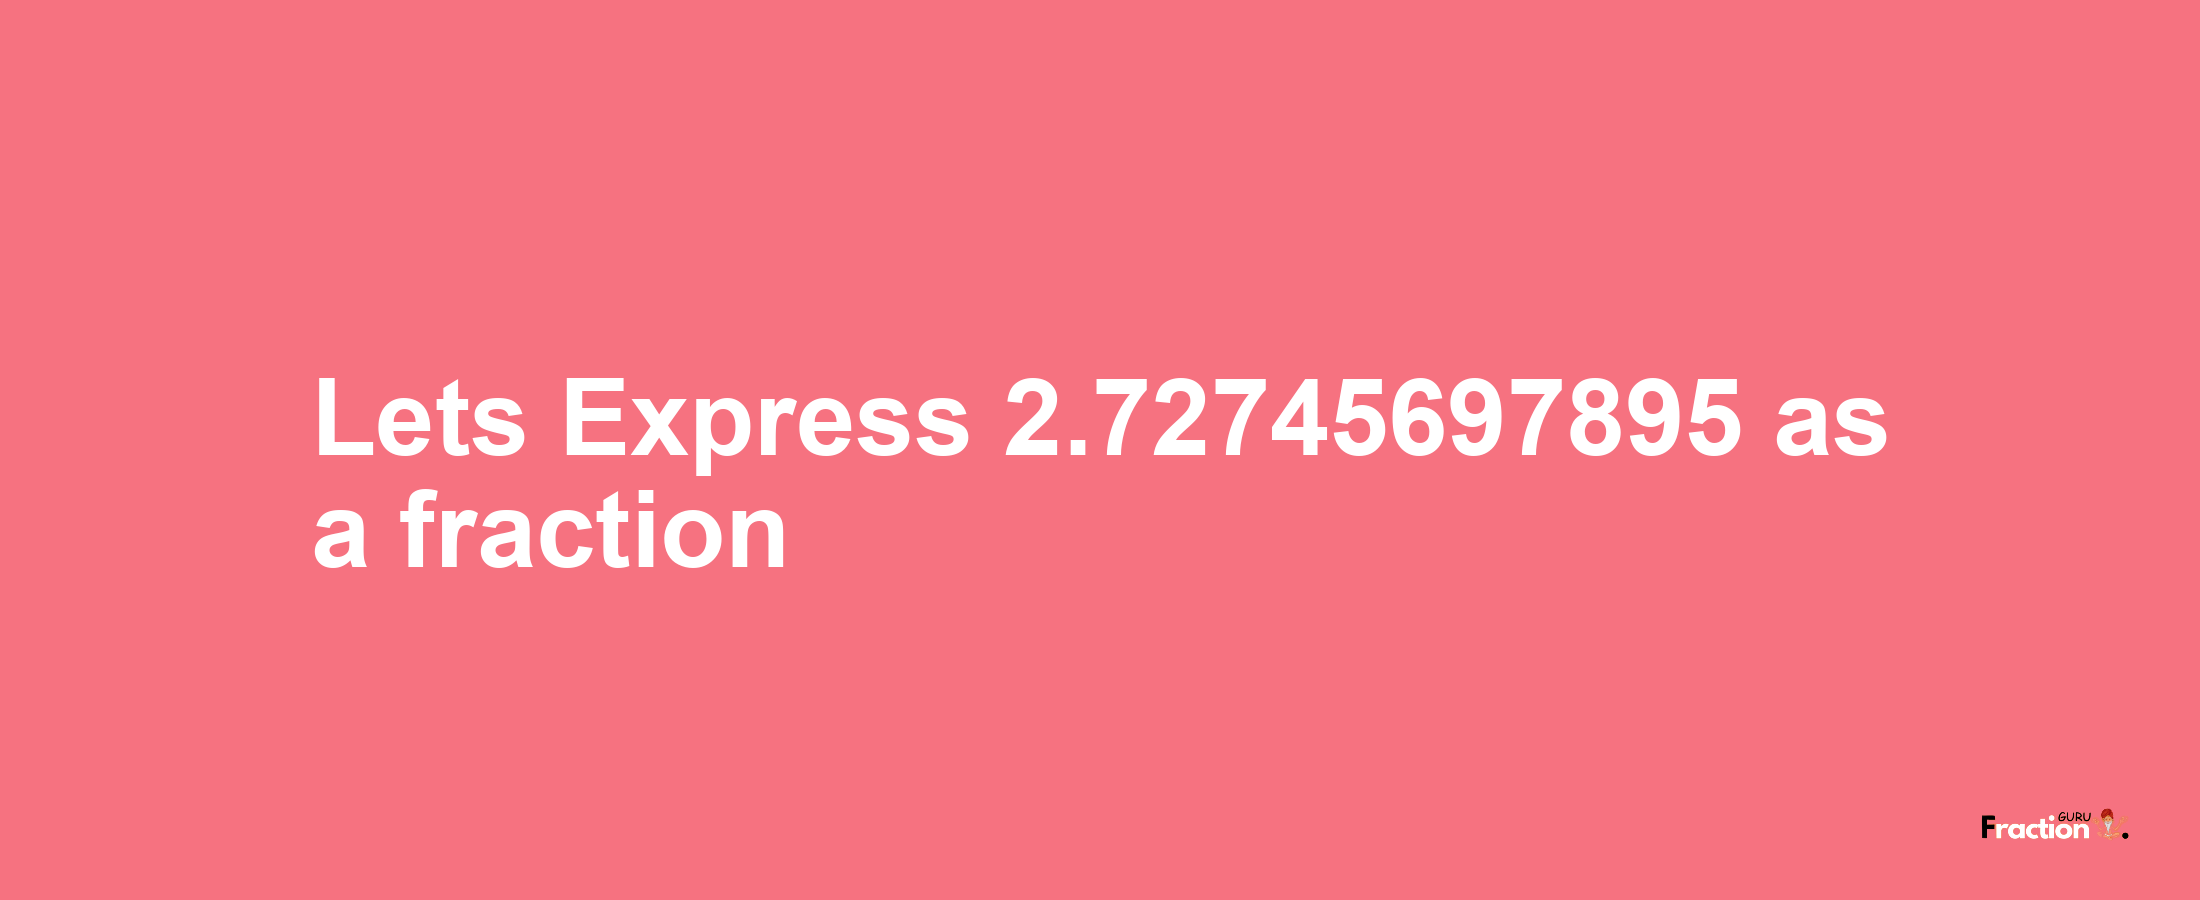 Lets Express 2.72745697895 as afraction